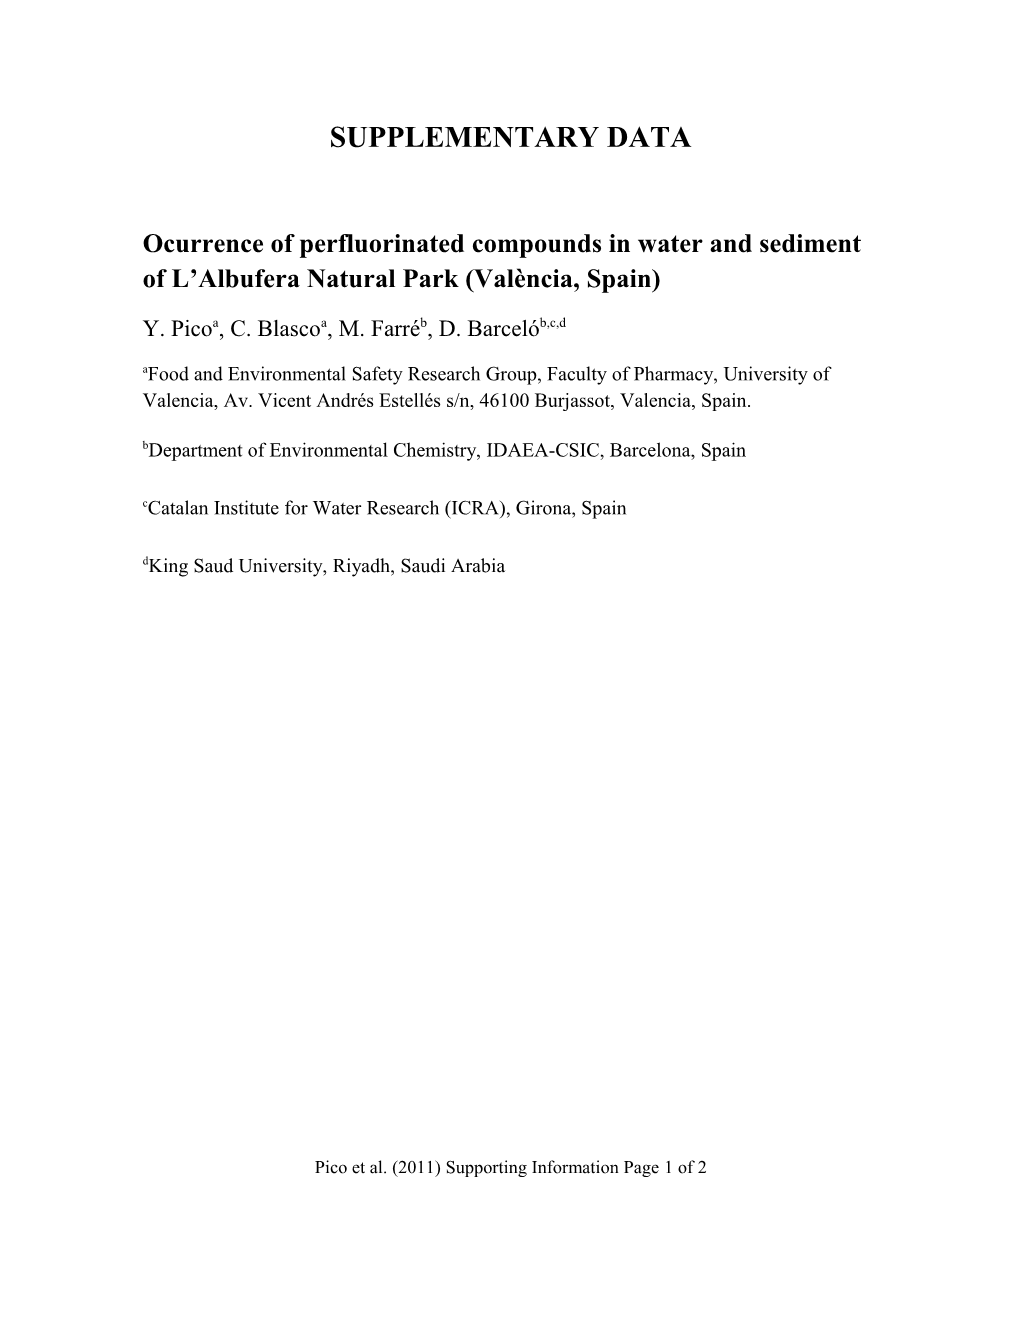 Ocurrence of Perfluorinated Compounds in Water and Sediment of L Albufera Natural Park